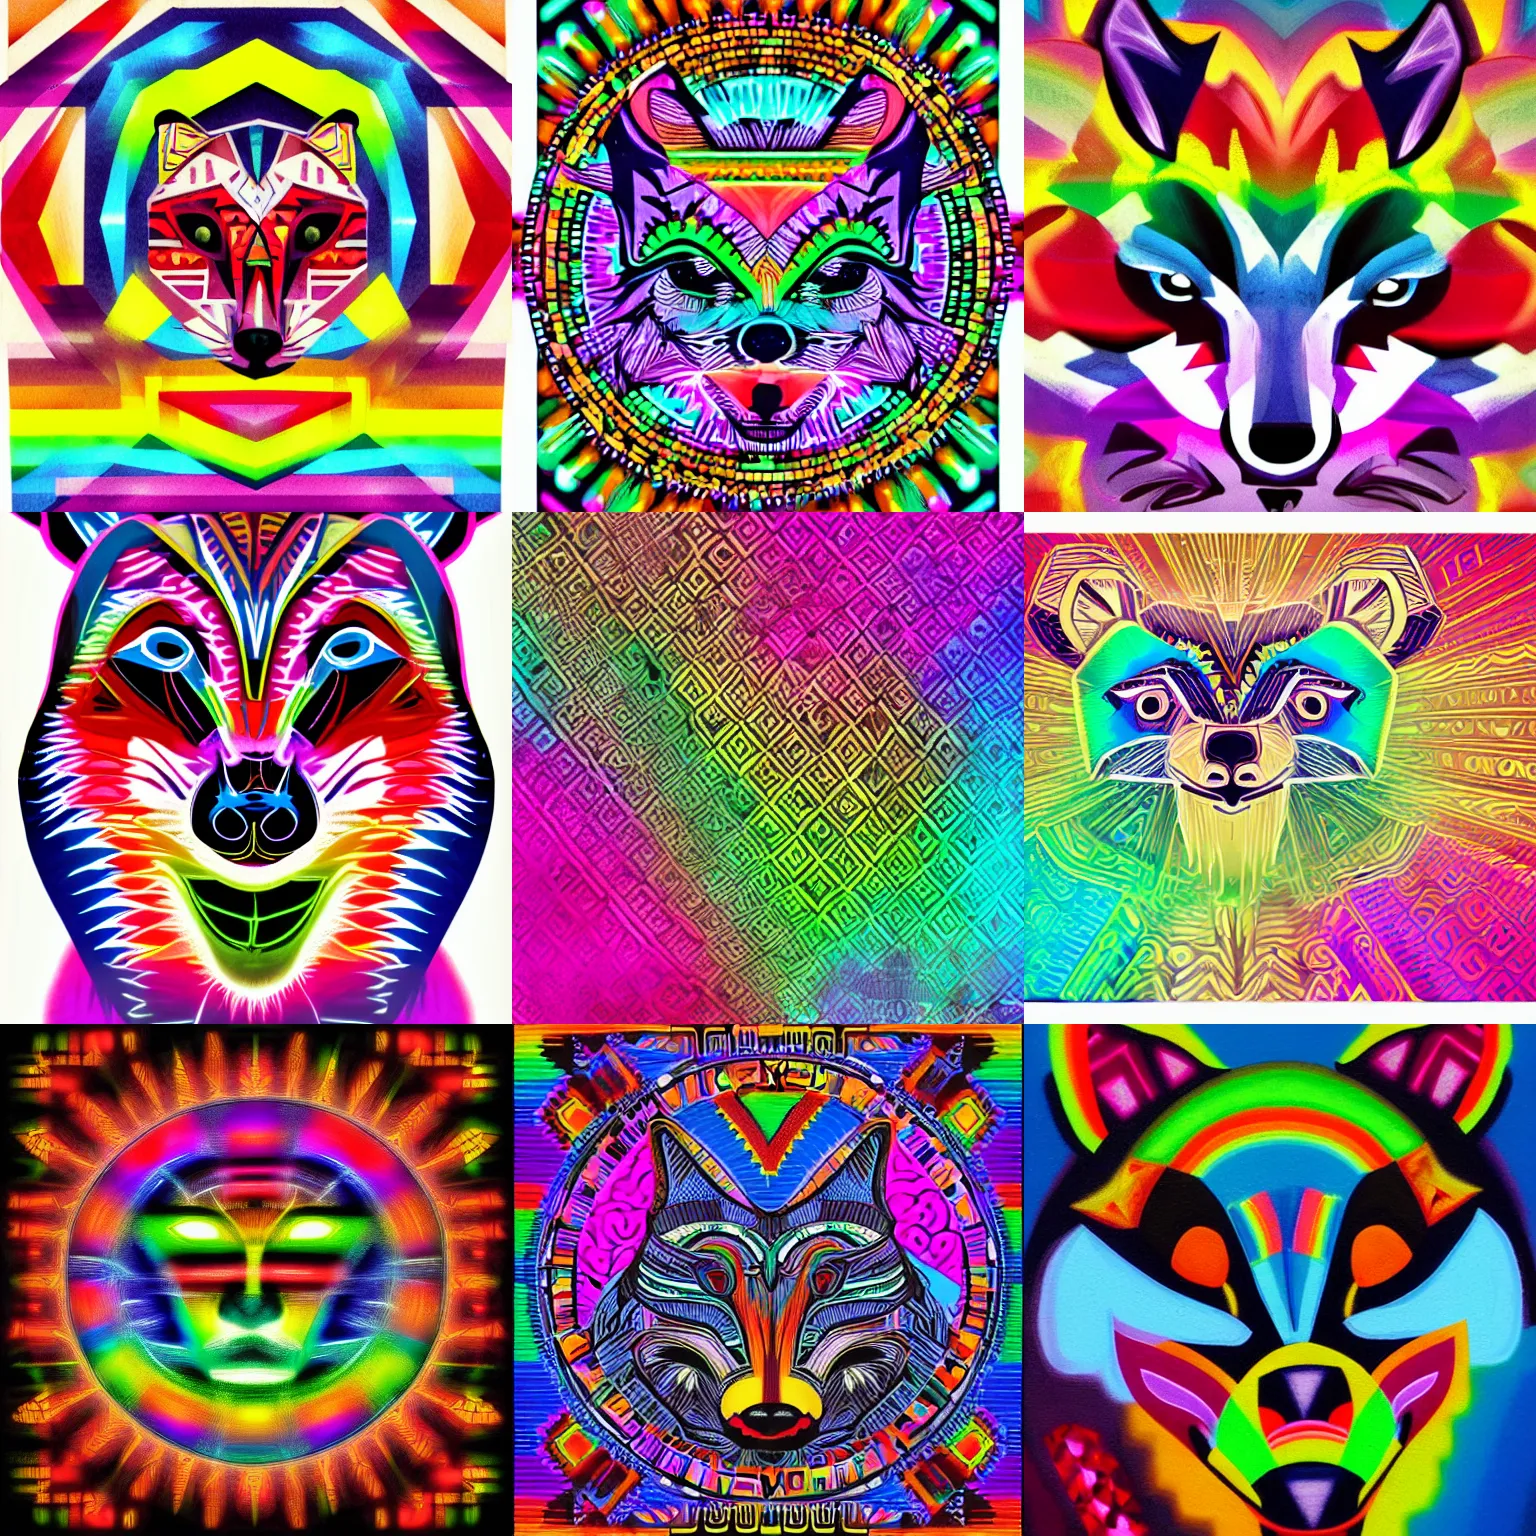 Prompt: Rainbow racoon face by Sylvia Ritter with neon rainbow aztec geometric patterns in background